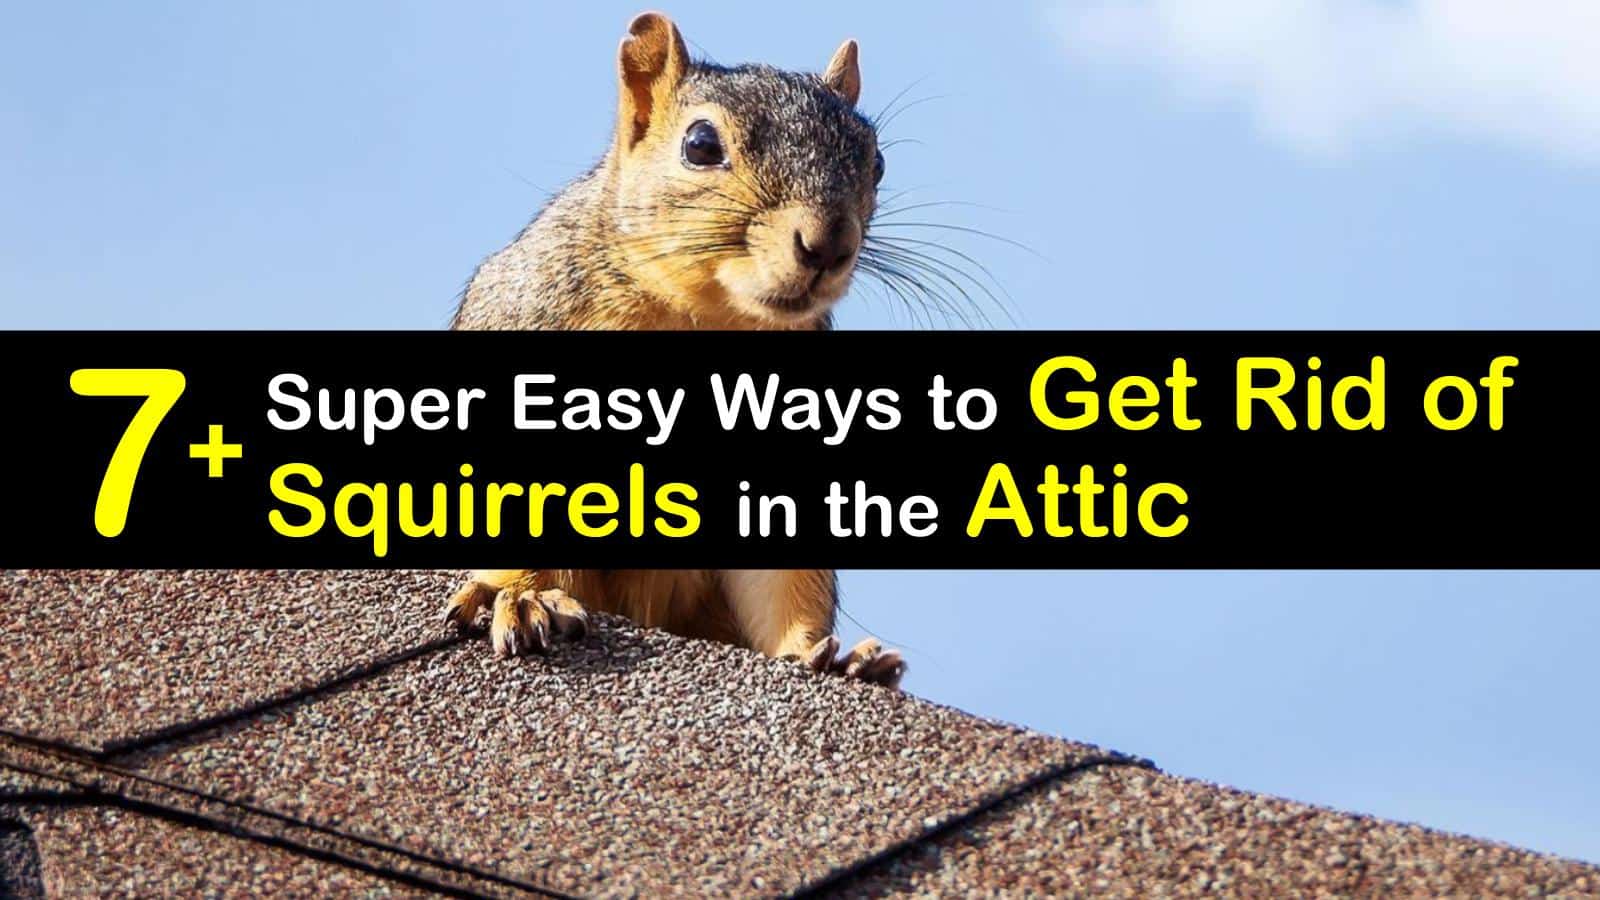 HOW TO GET RID OF SQUIRRELS LIVING IN MY ROOF - Apk By Plafon.Id